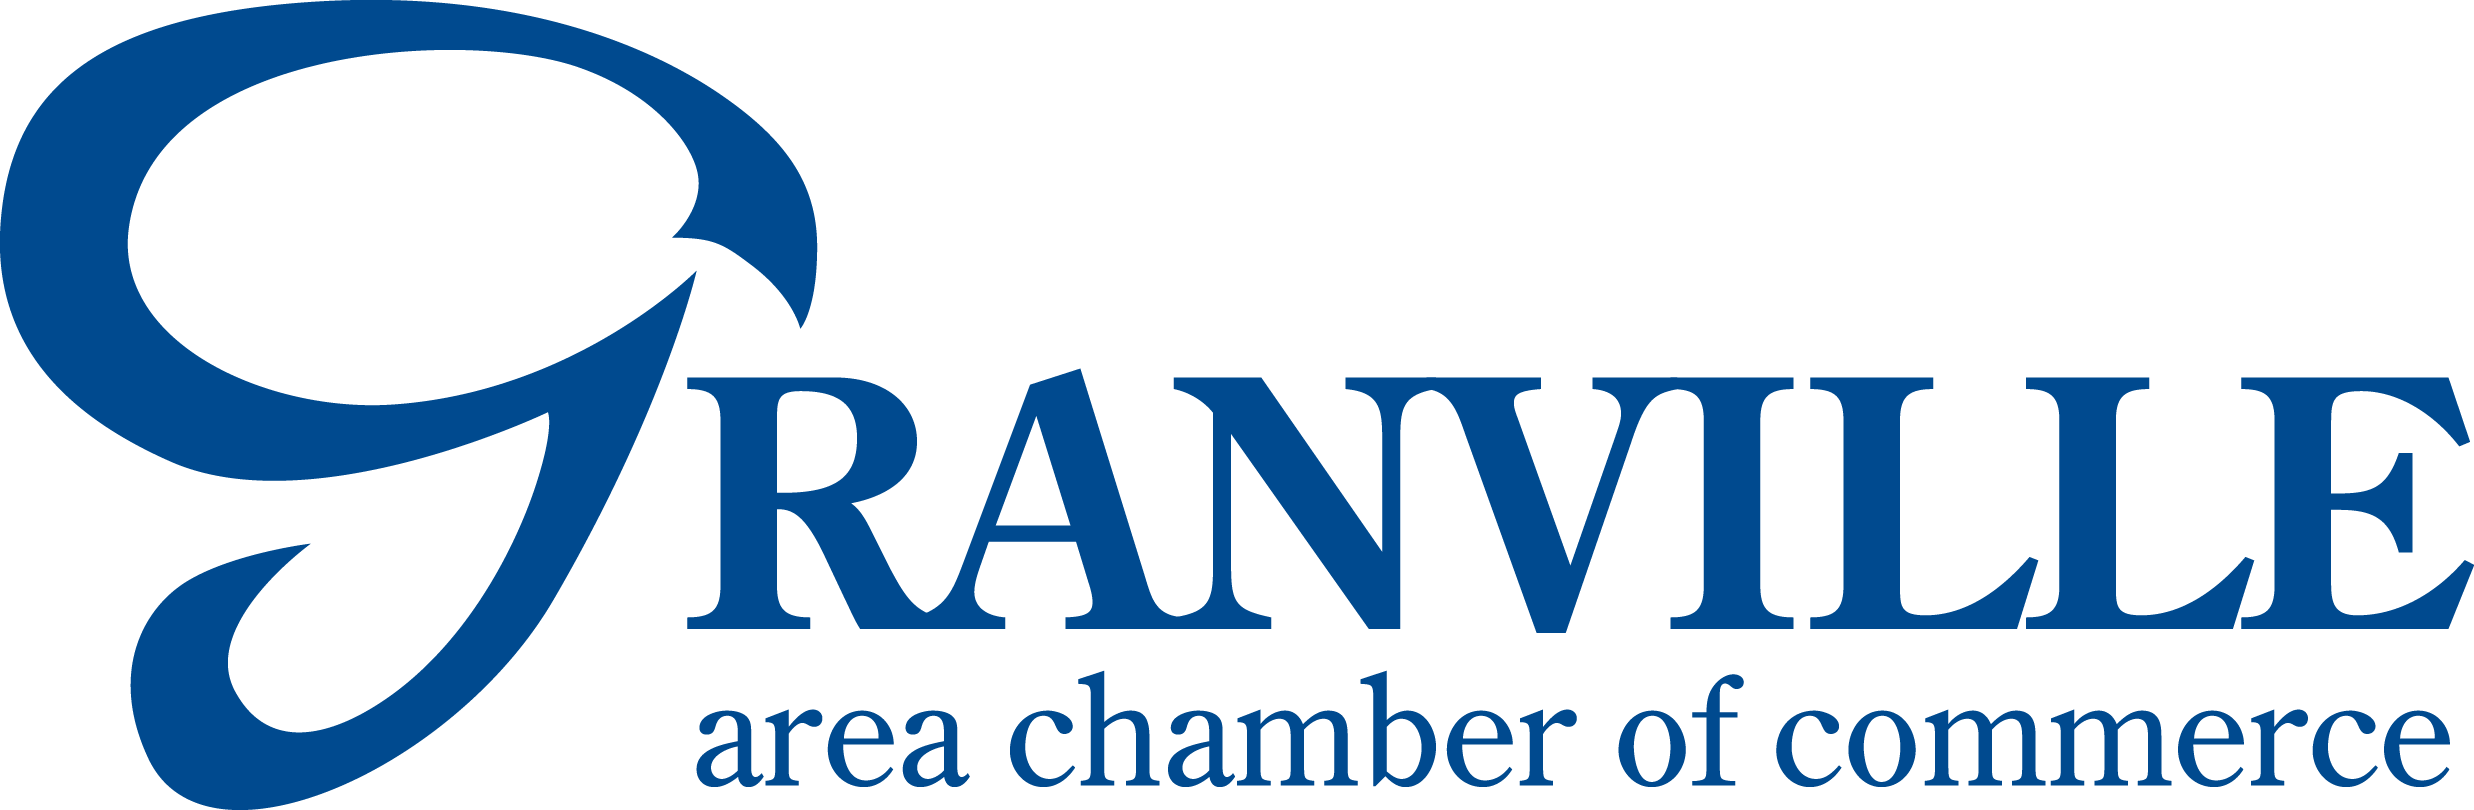 Granville Area Chamber of Commerce